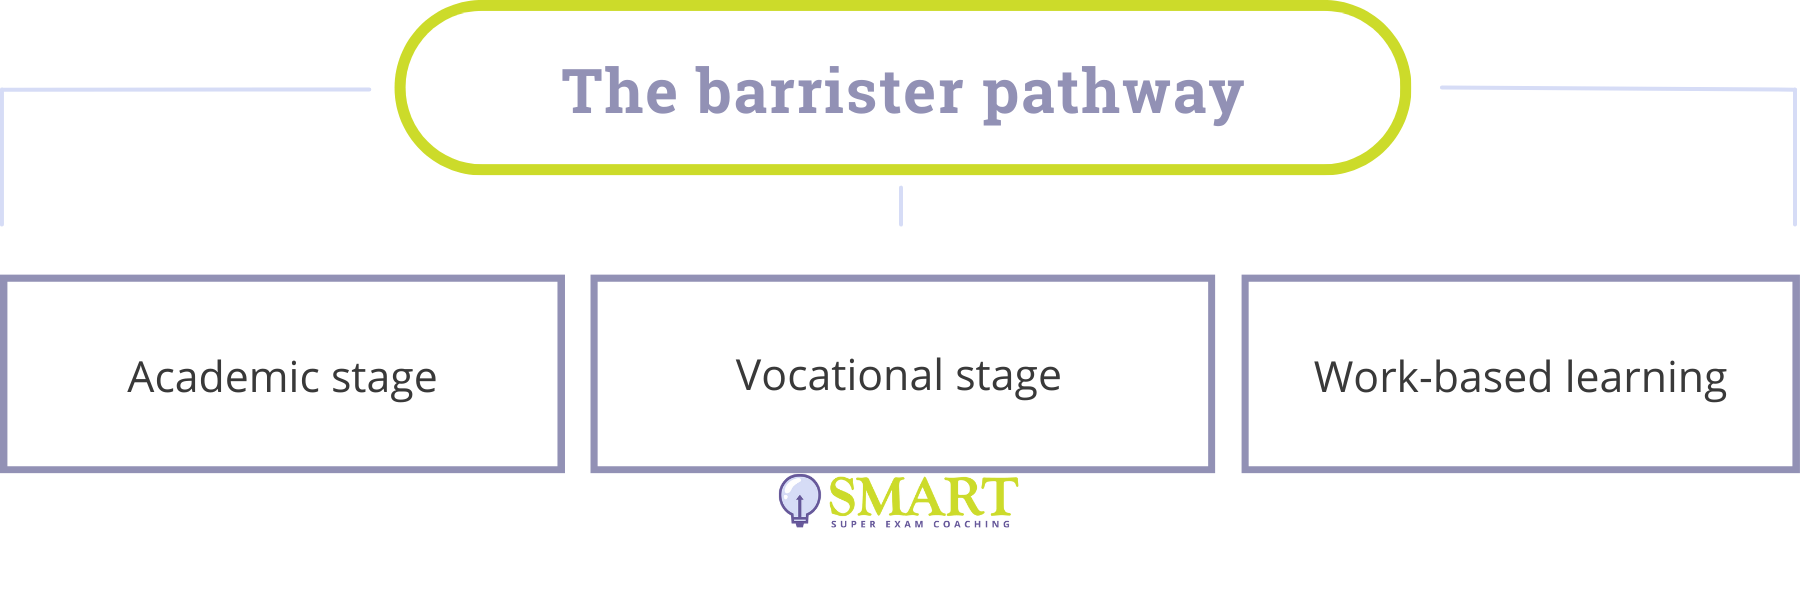 The Barrister Pathway